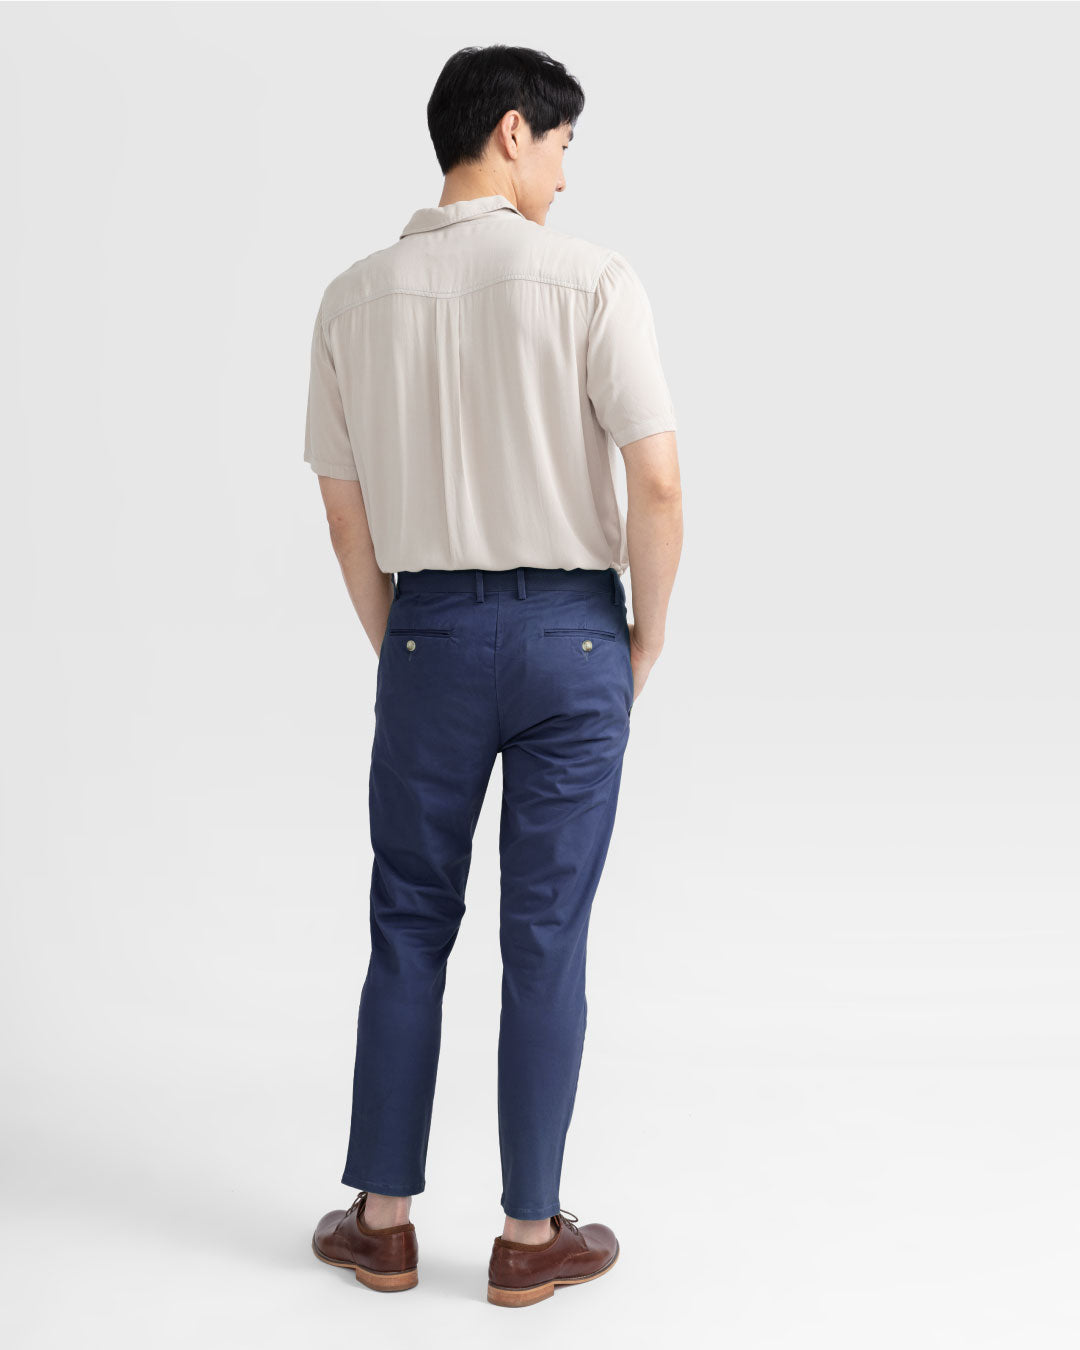 The Ultimate Navy Chinos for Travel | Bluffworks